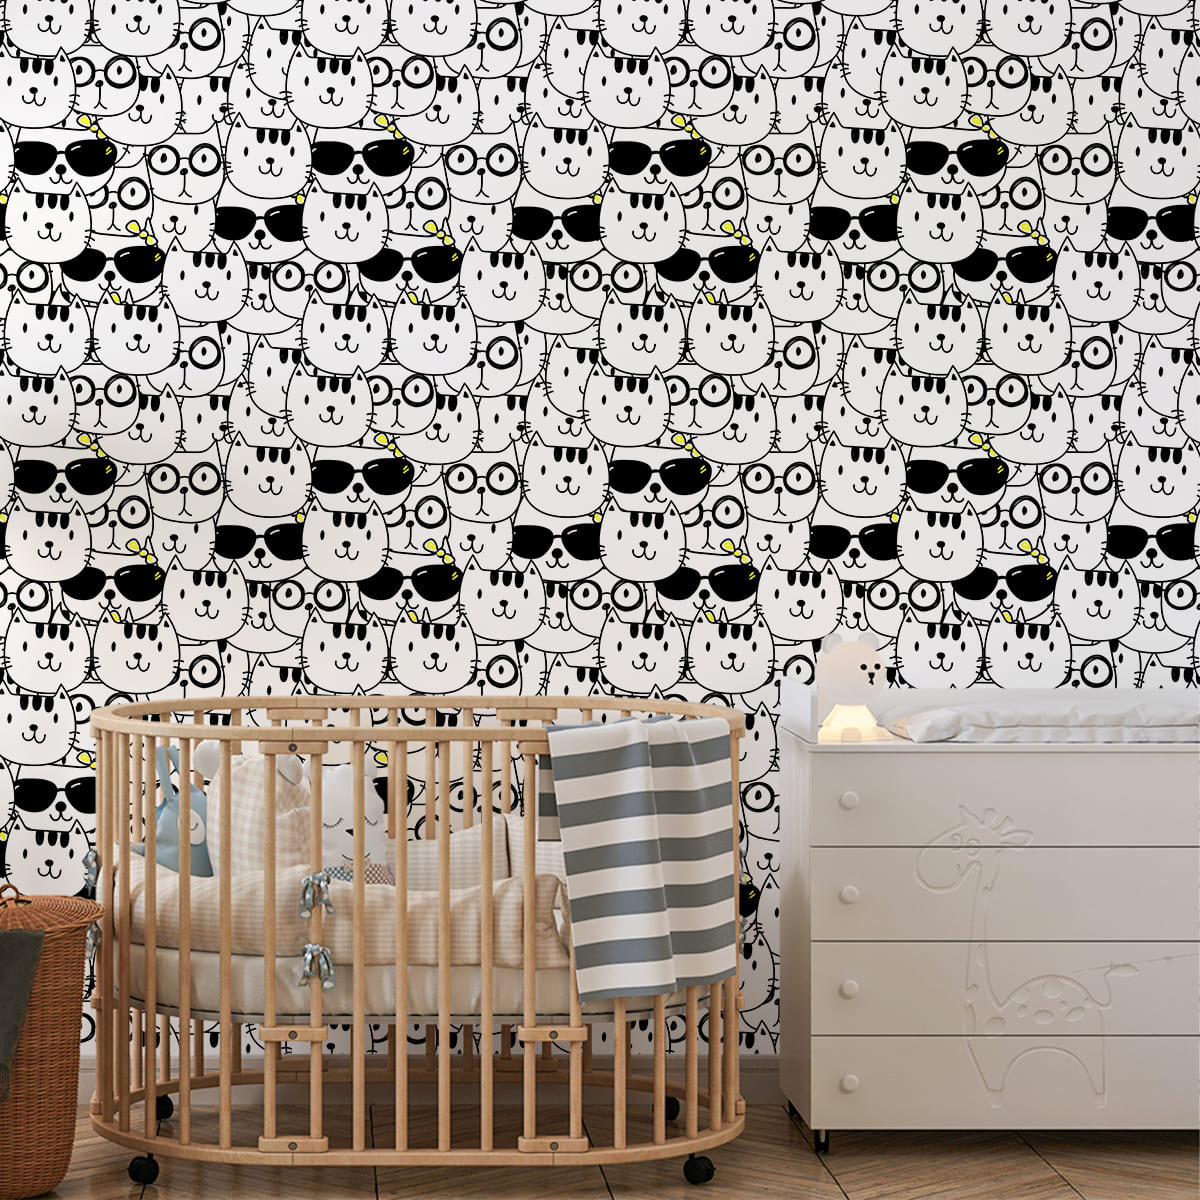 Cool Cats Motifs For Kids Room